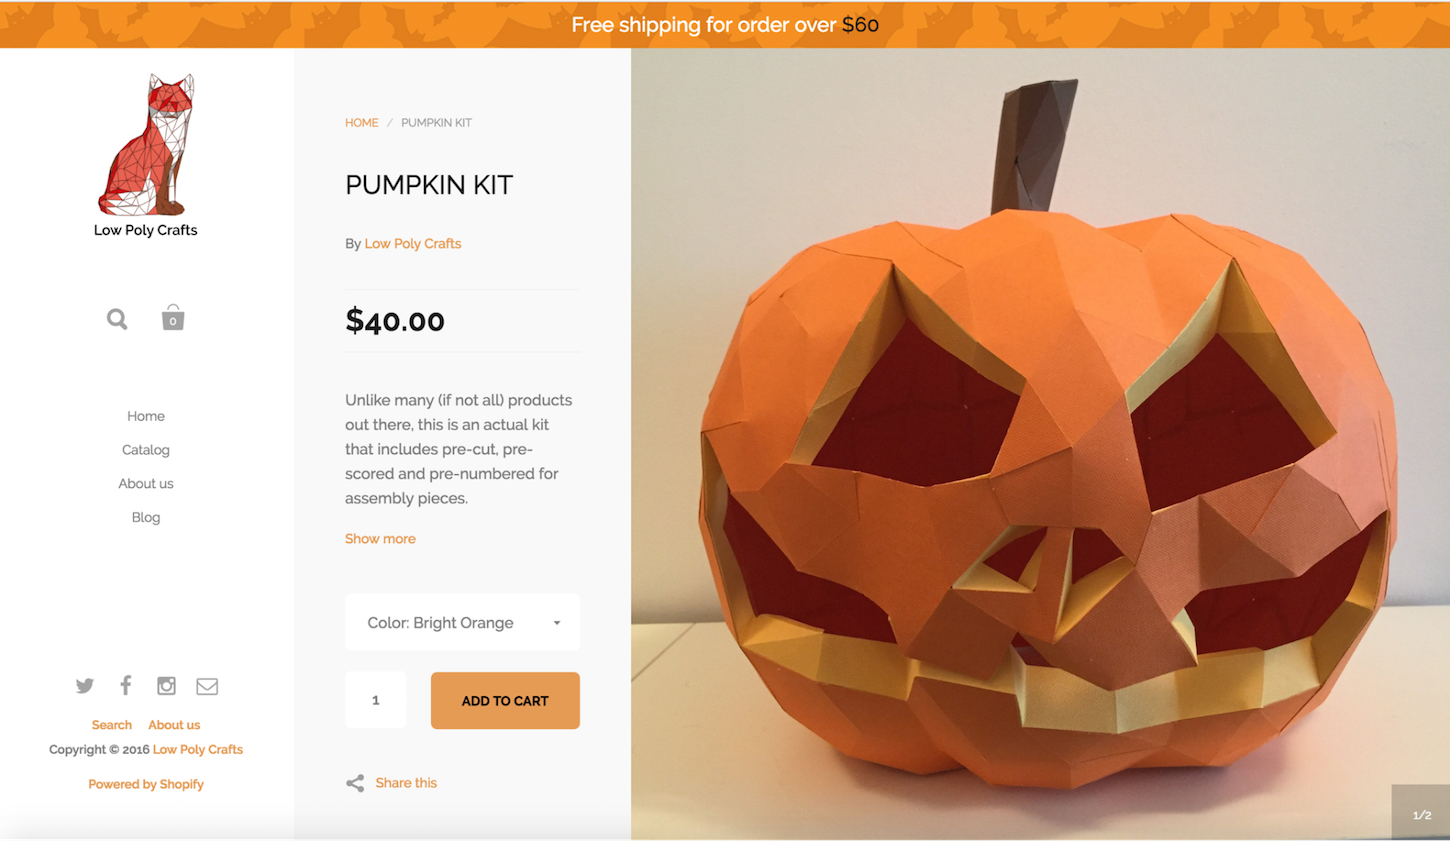 7 Ways to Spice Up Your Website for Halloween: Pumpkin Kit